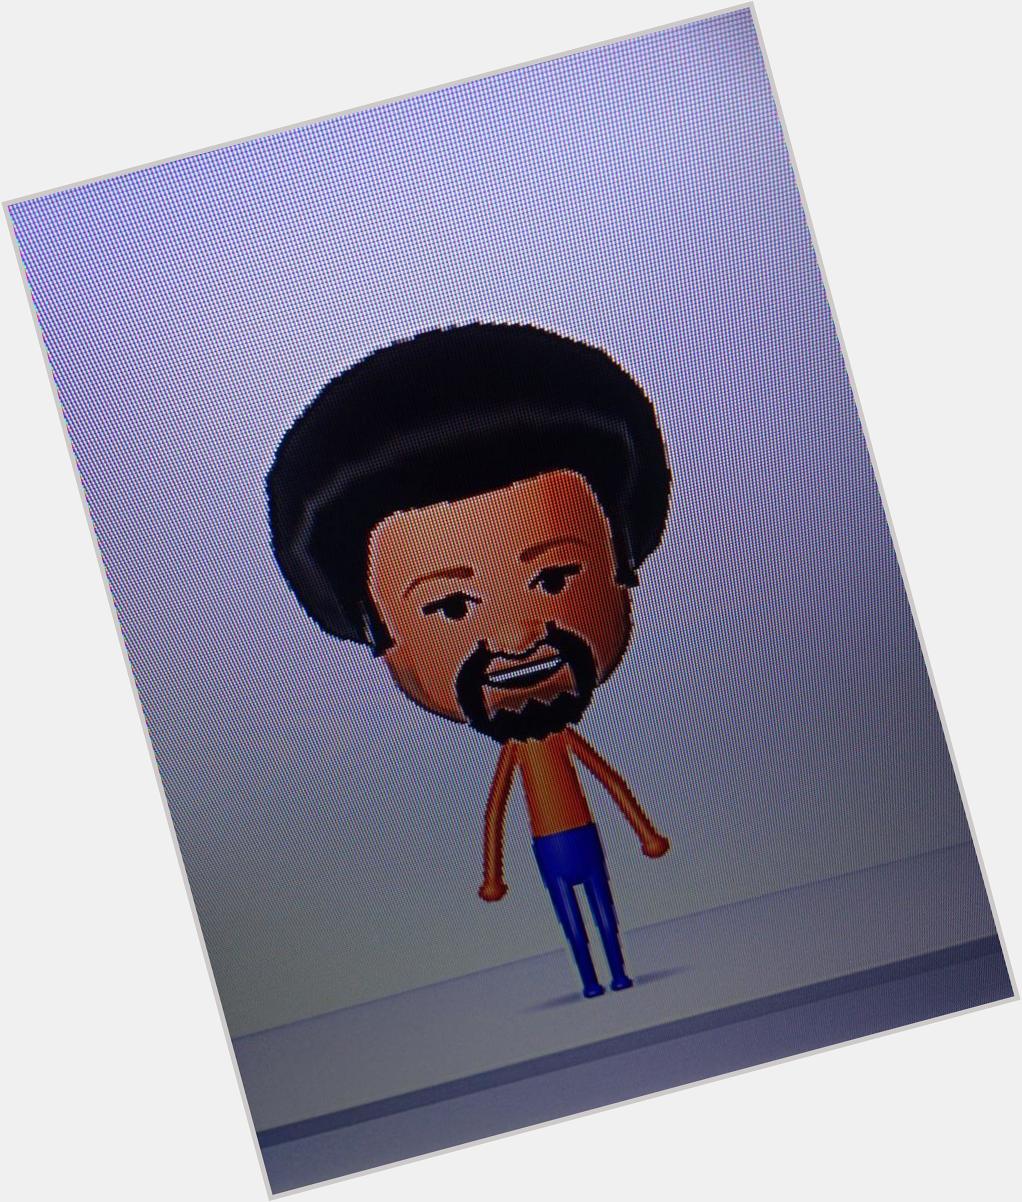  Happy Birthday Maurice White your my ICON & MY NINTENDO MII CHARACTER..EWF 4EVR. 